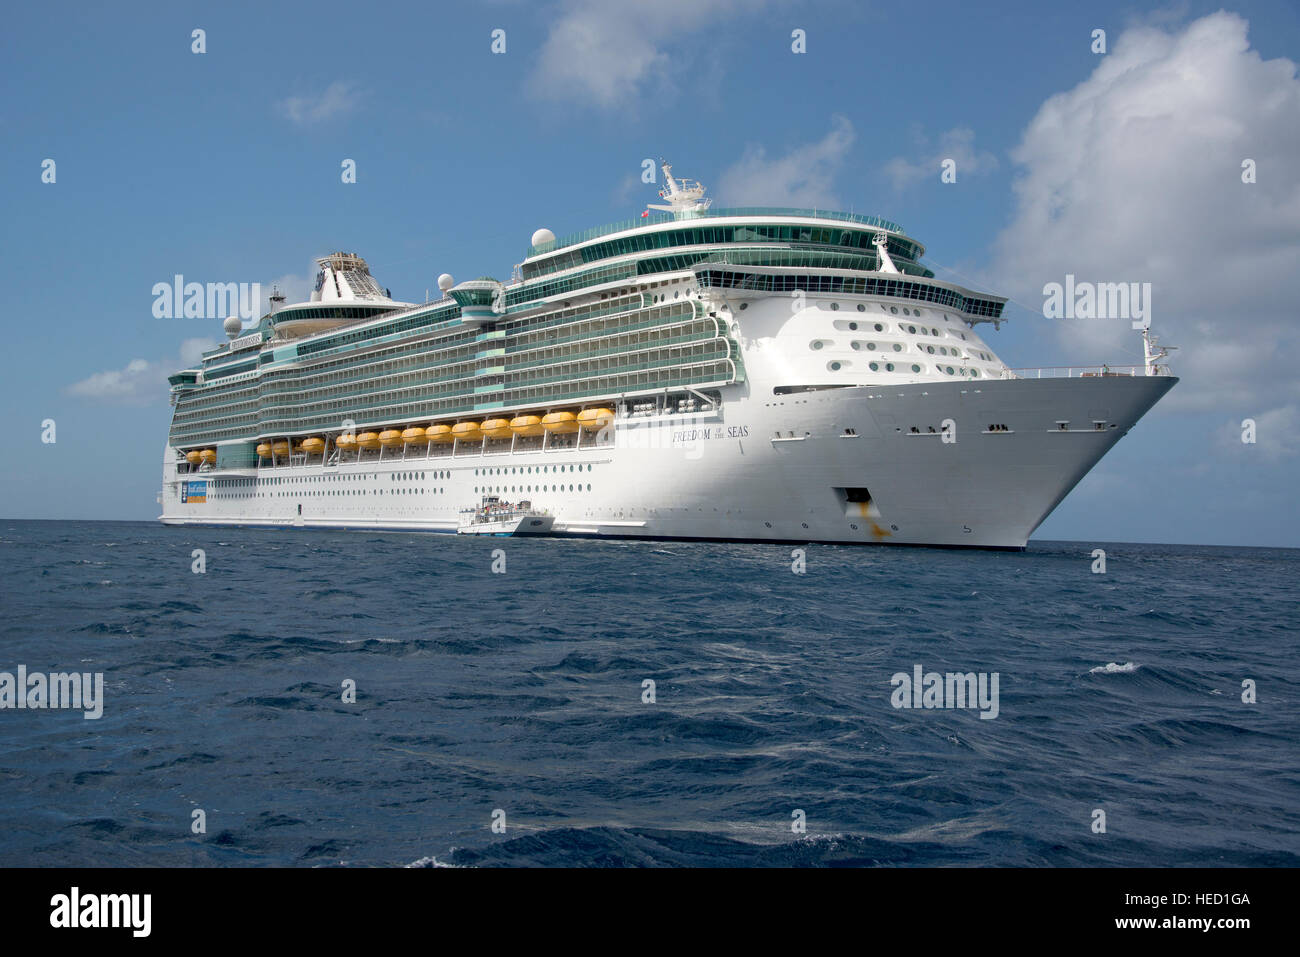 The Royal Caribbean Freedom of the Seas, which carries 4,515 passengers and 1,360 crew, and the Celebrity Reflection, which carries 3,609 passengers and 1271 crew, in the harbor of George Town, Grand Cayman in the Cayman Islands on Tuesday, December 20, 2016.  The smaller boat is a tender to ferry passengers back and forth to the island. Credit: Ron Sachs / CNP /MediaPunch Stock Photo